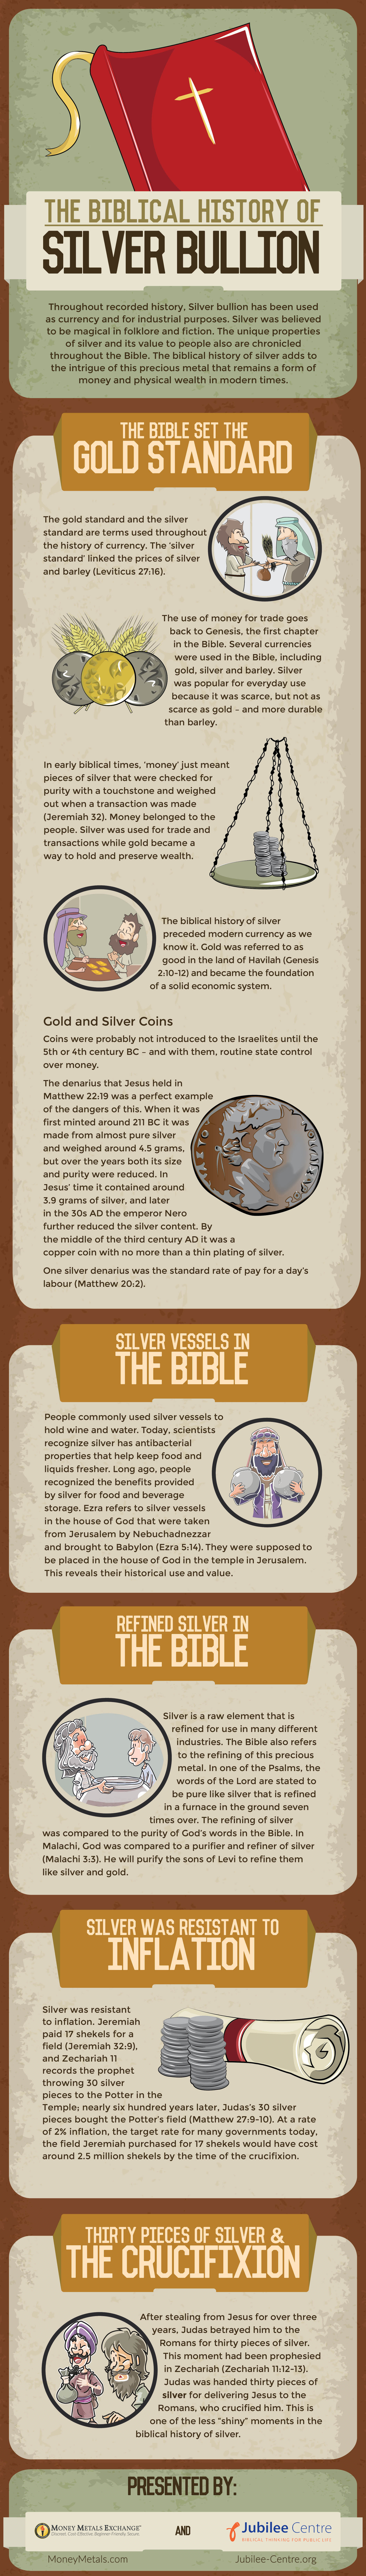 How Gold & Silver Were Viewed, Valued & Used in Biblical Times